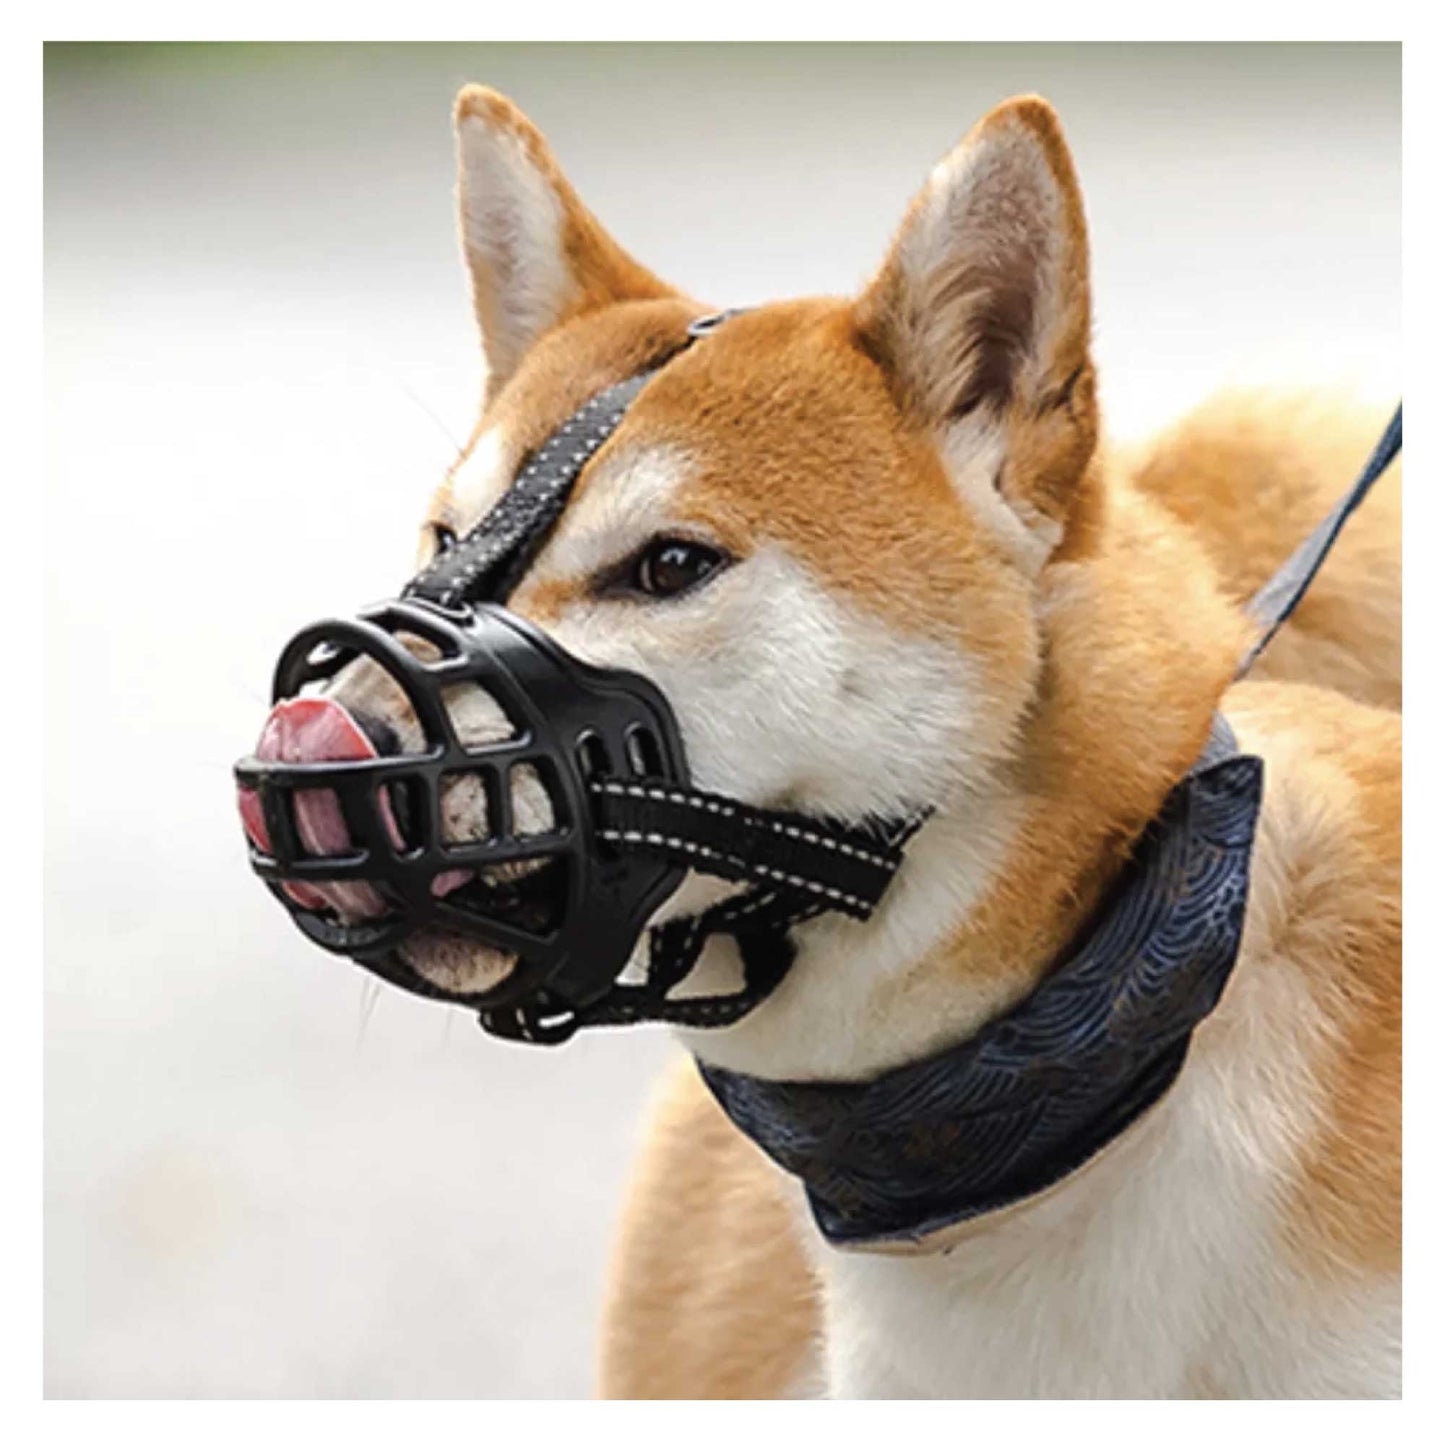 Rubber Dog Muzzle - Basket Mouth Guard For Puppy Barking Biting XS S M L XL XXL